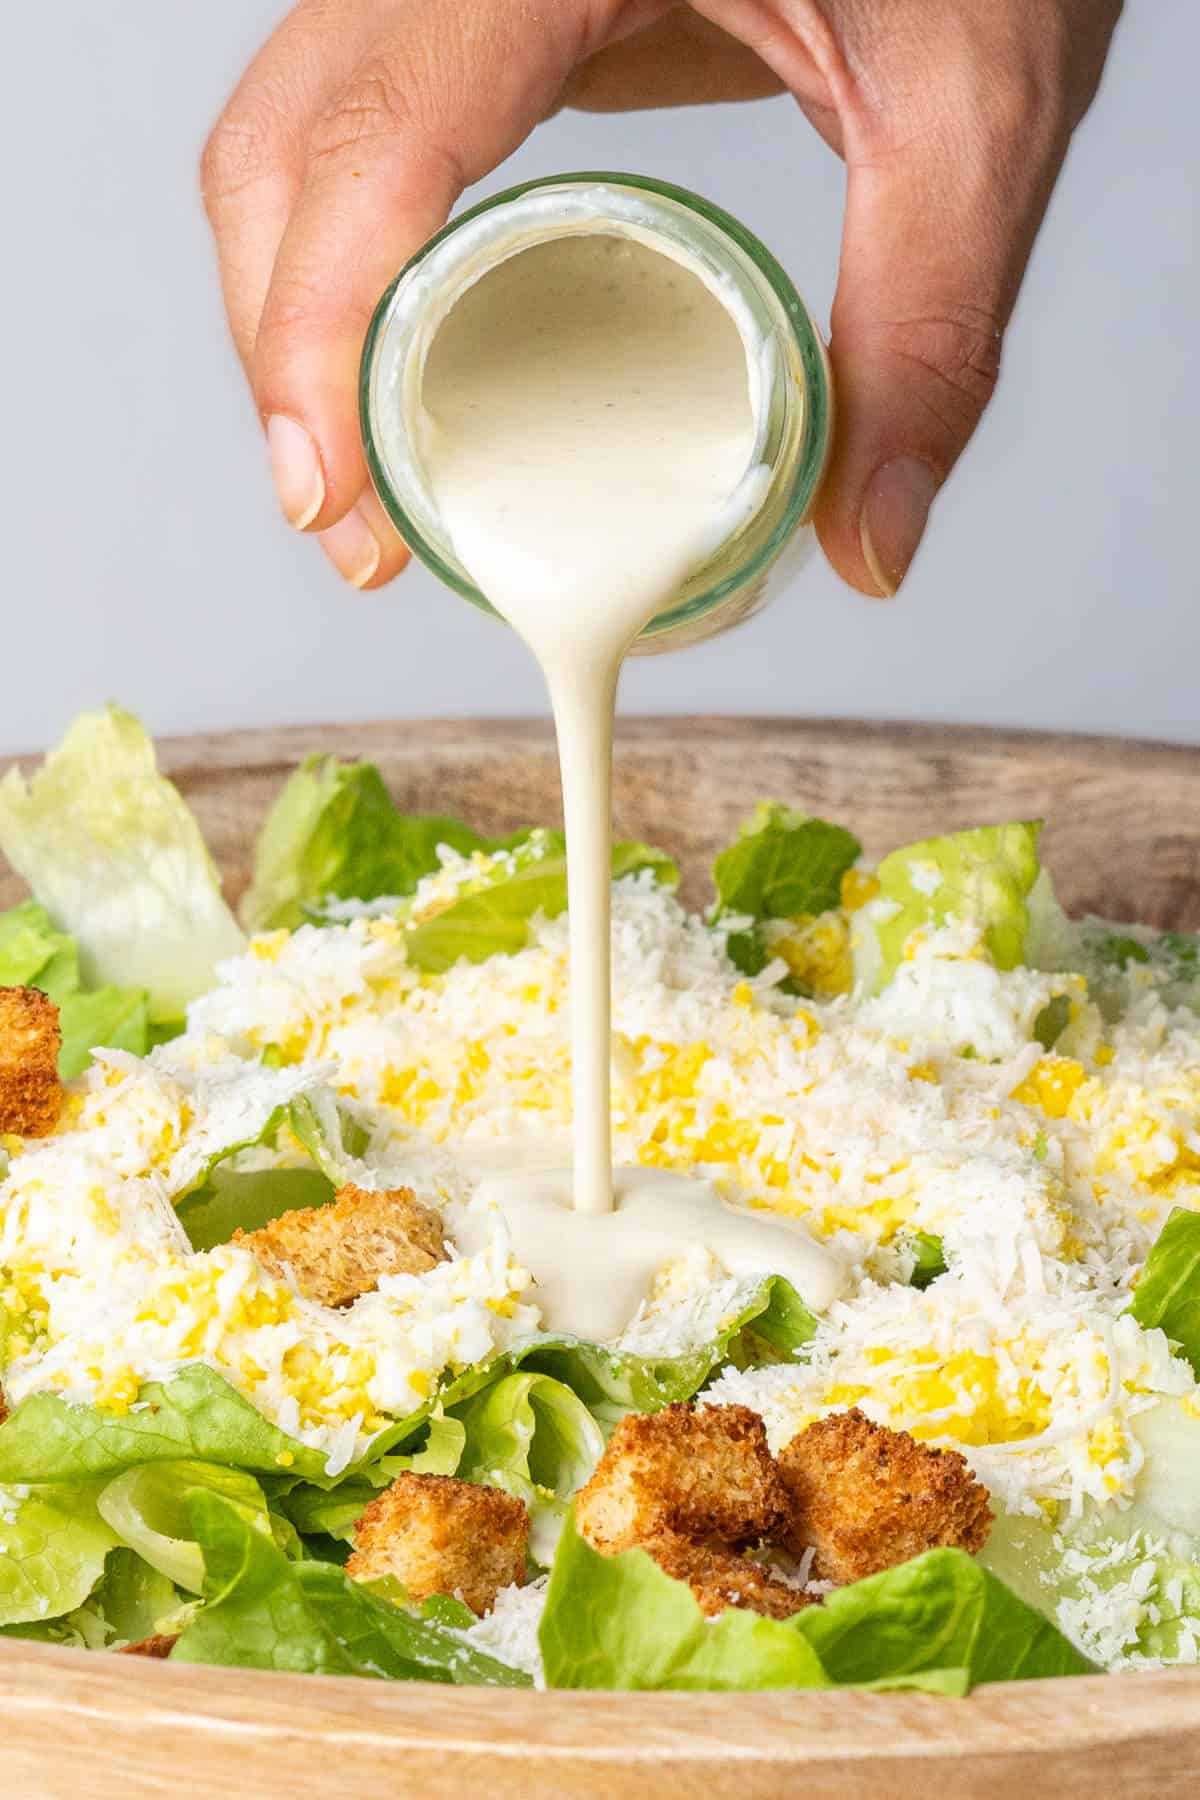 Caesar salad dressing without anchovies being poured over the salad